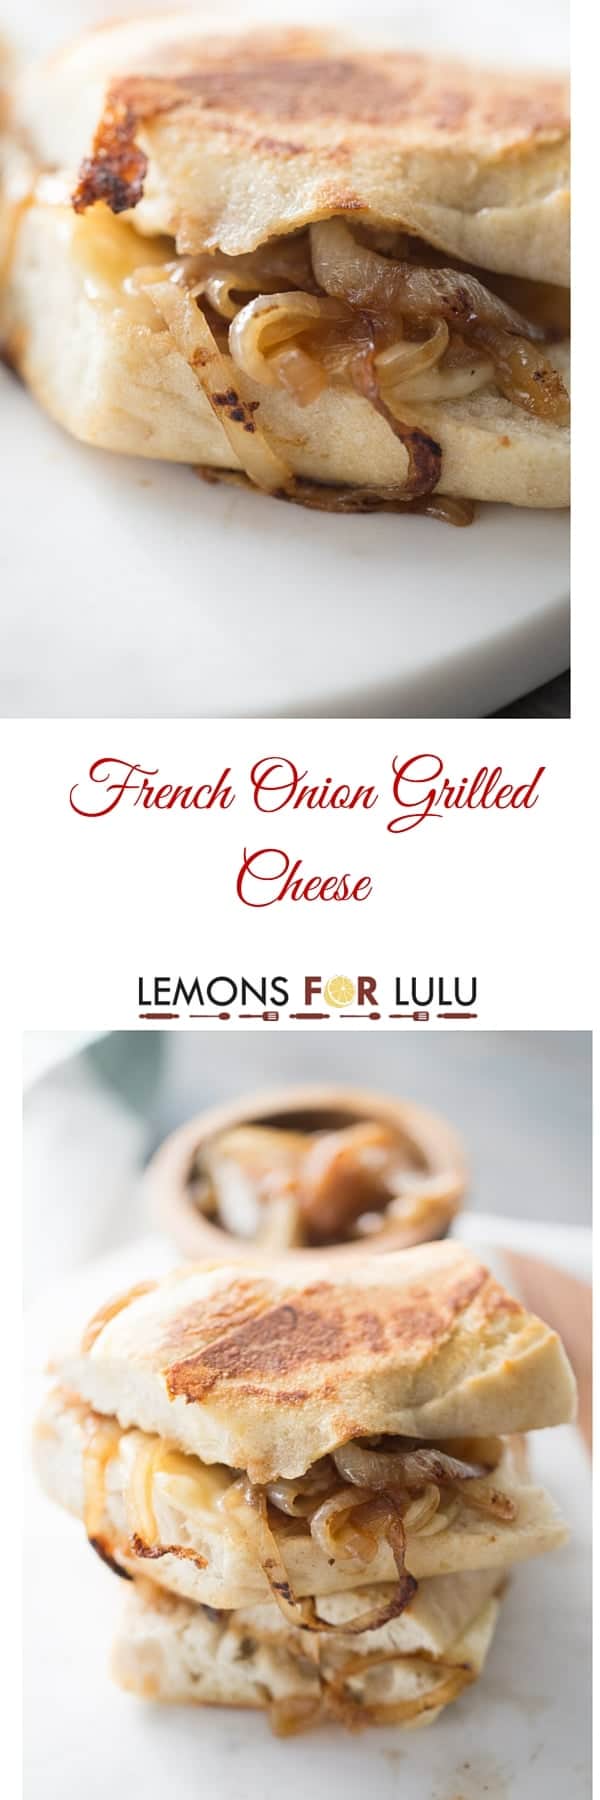 Caramelized onions and lots of gooey cheese come together to taste like the classic French onion soup!! lemonsforlulu.com